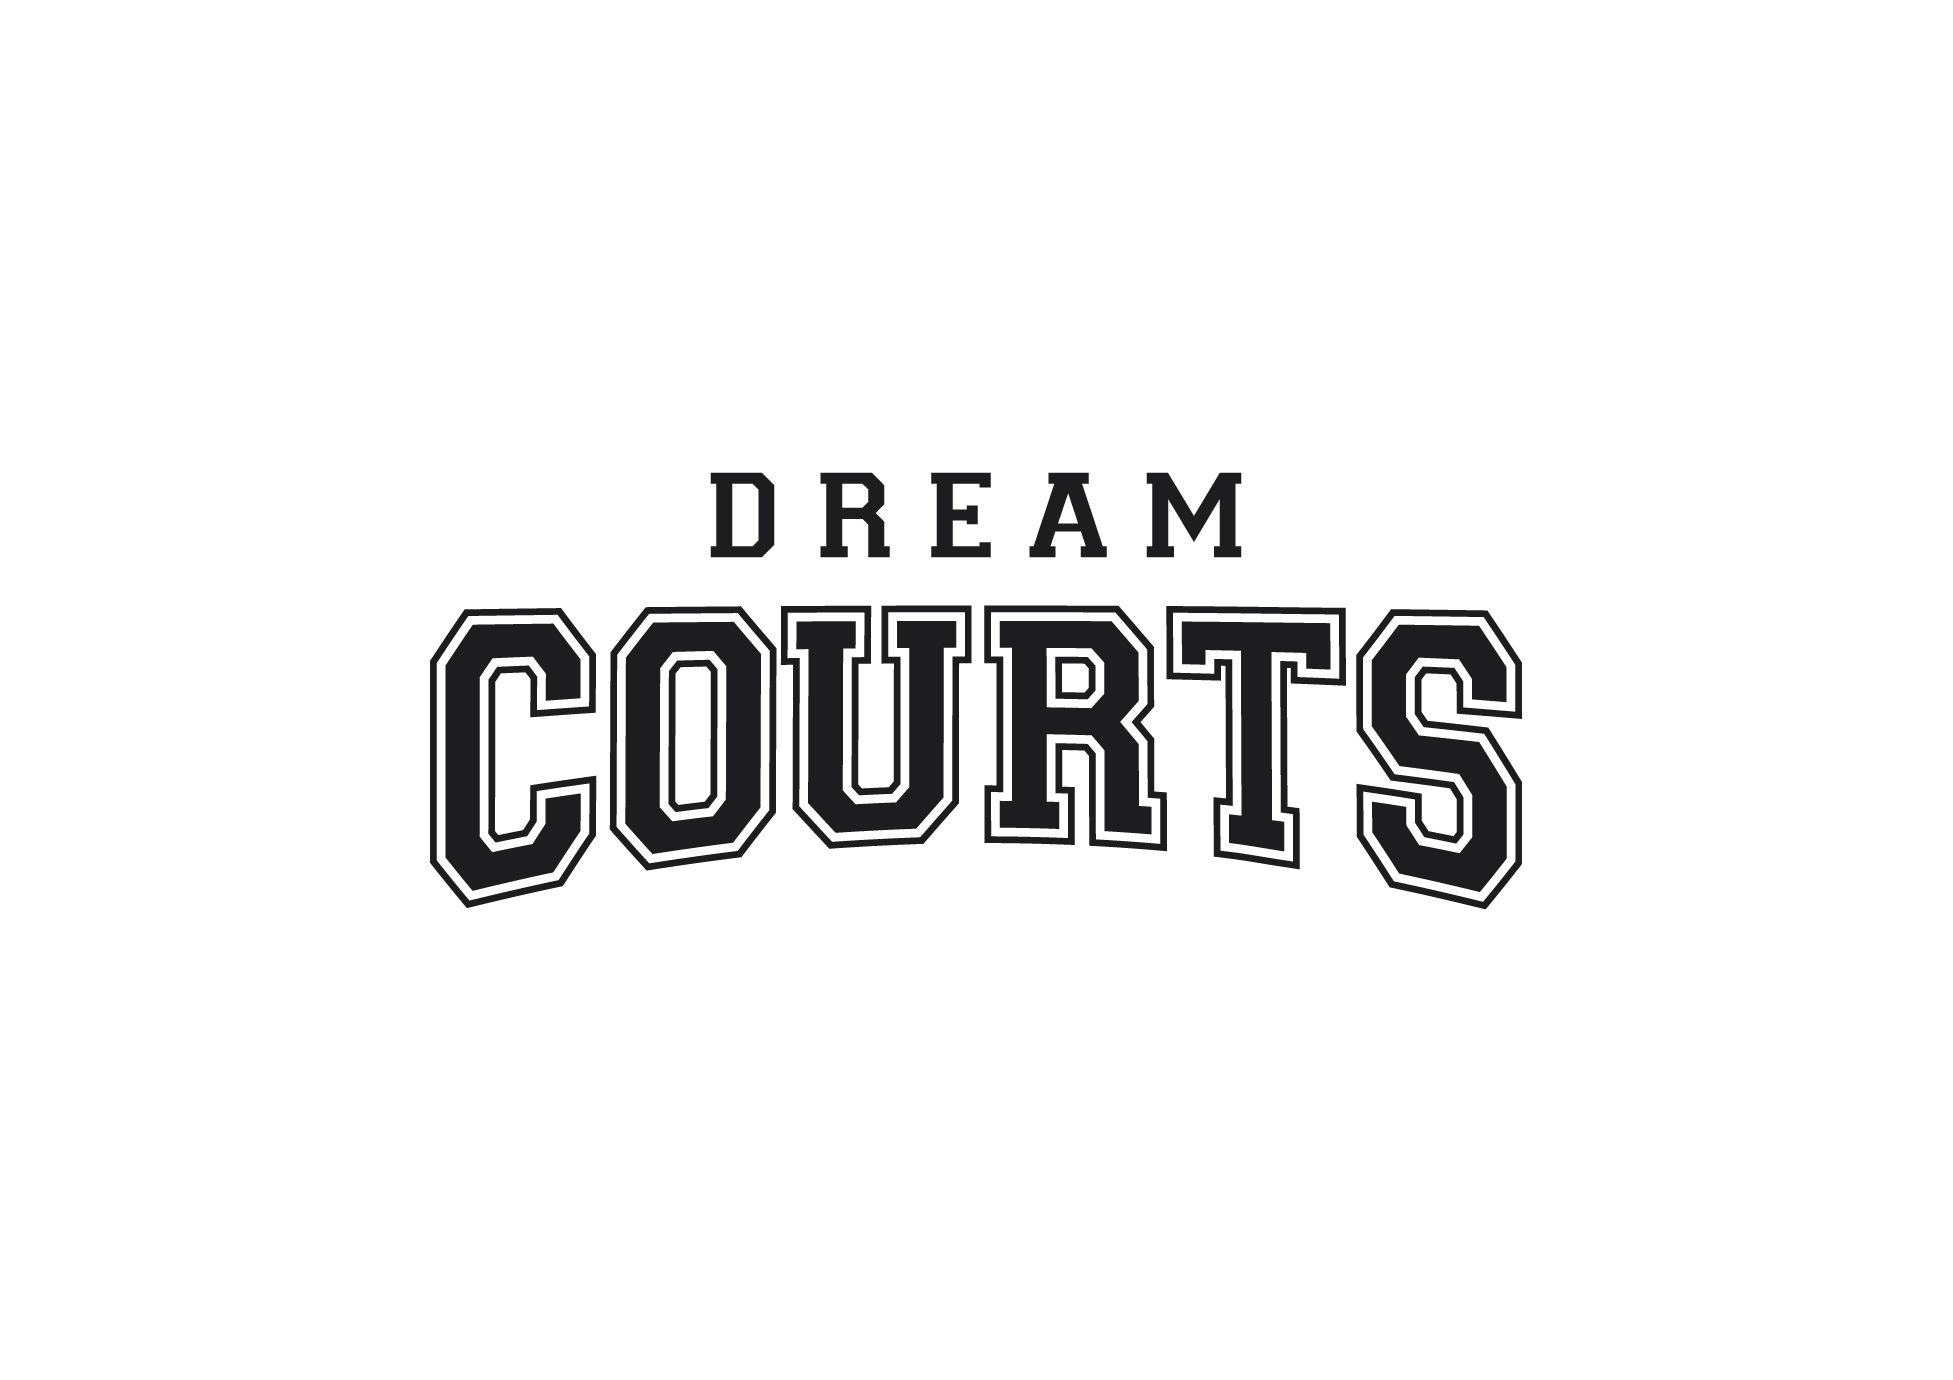 DreamCourts Lifestyle